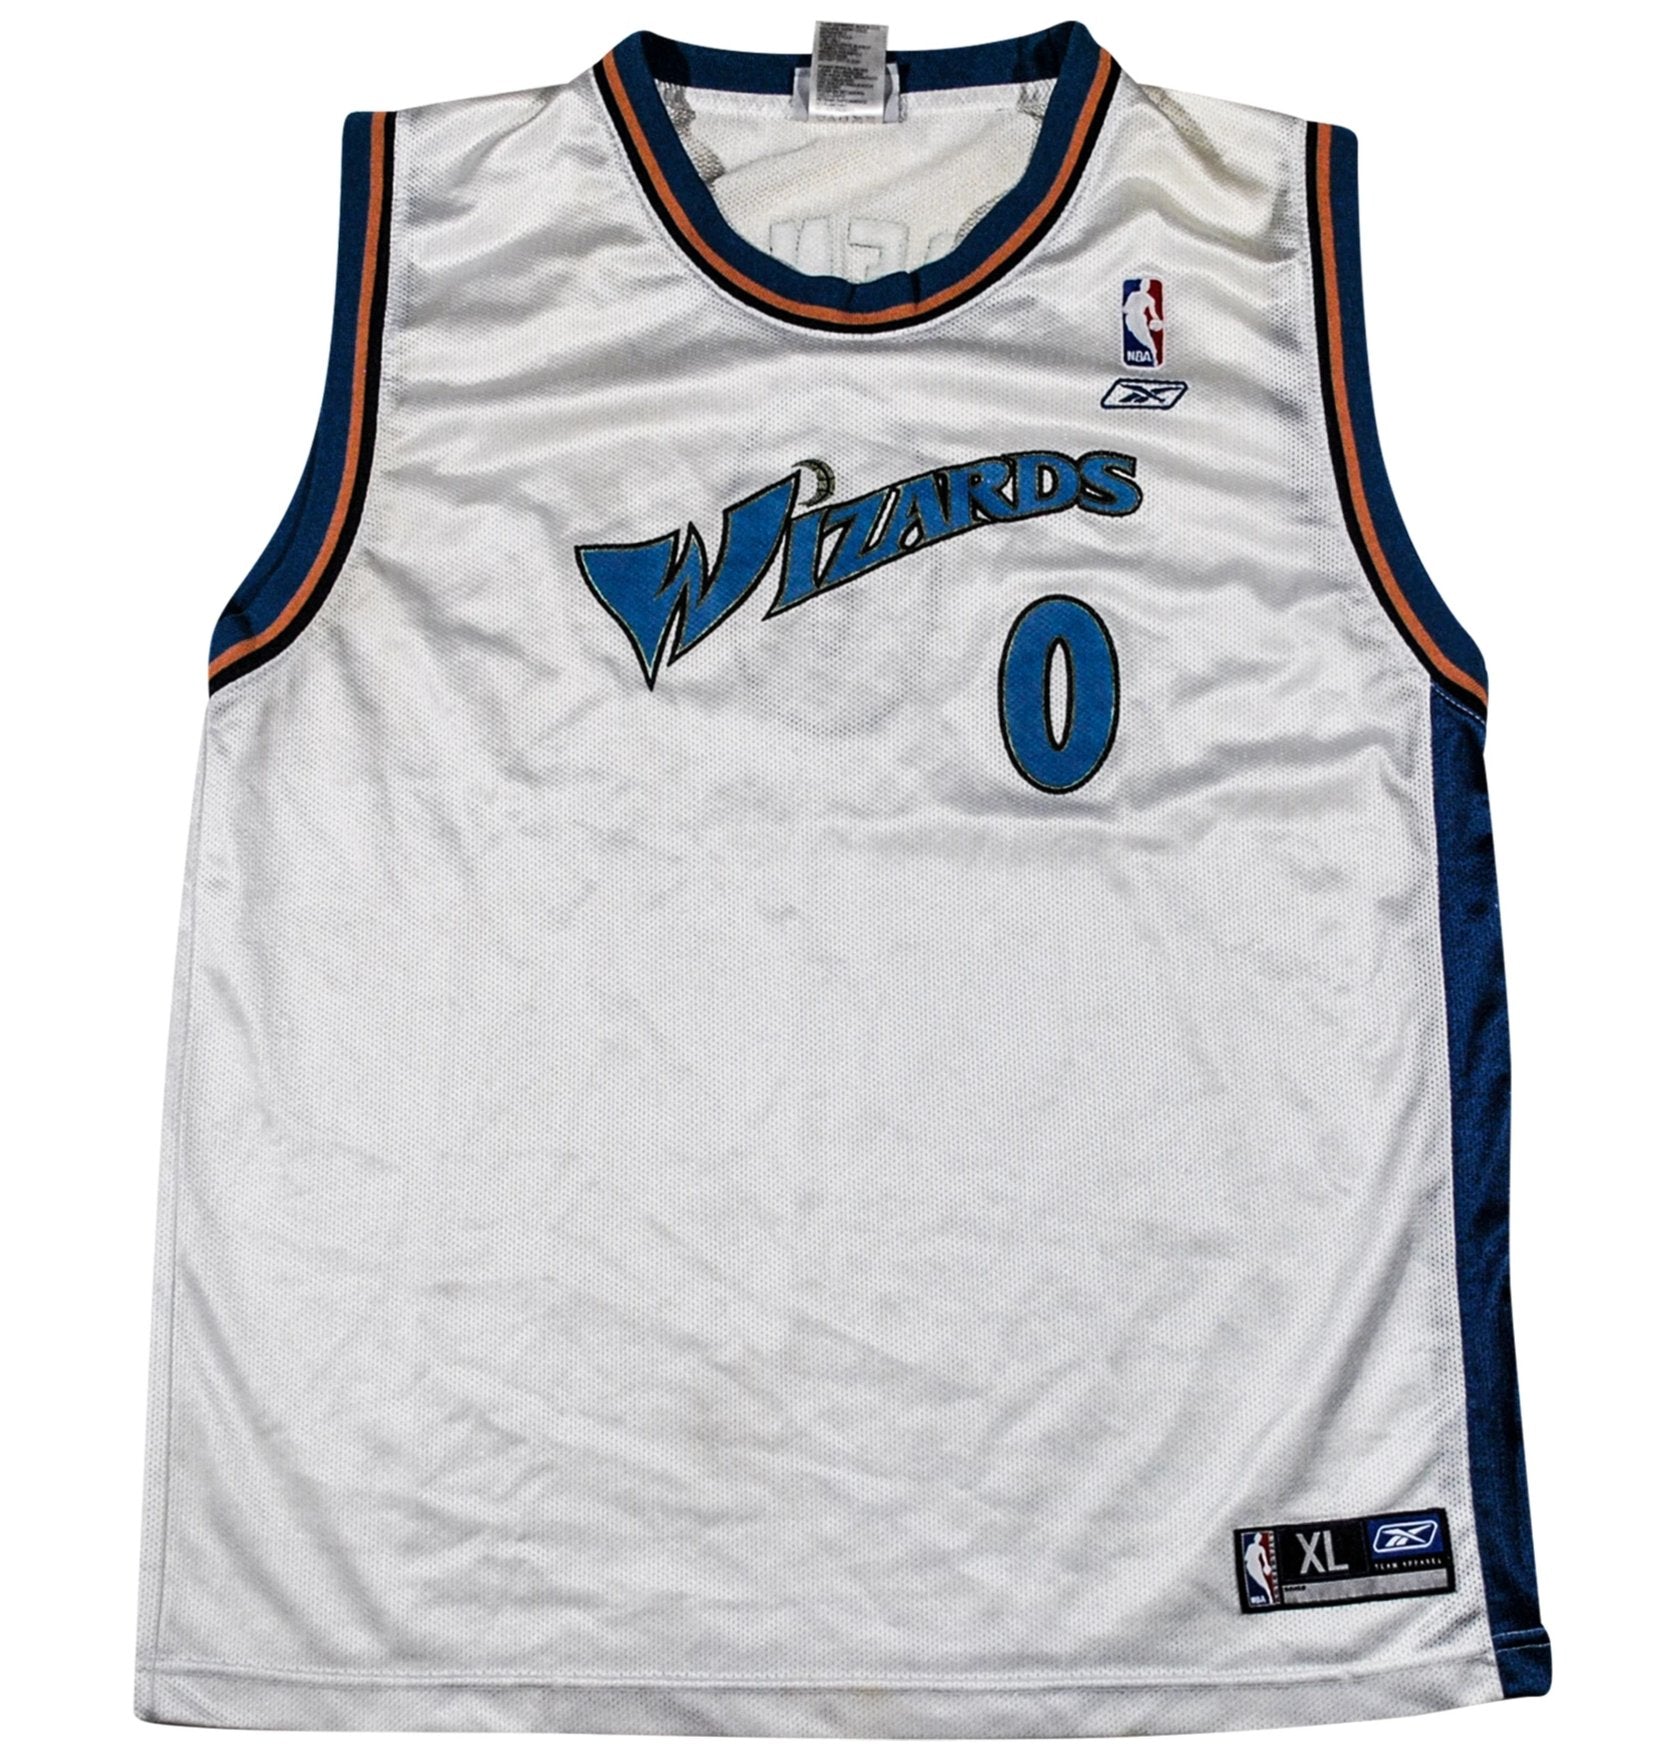 NBA jersey collection youth L/XL